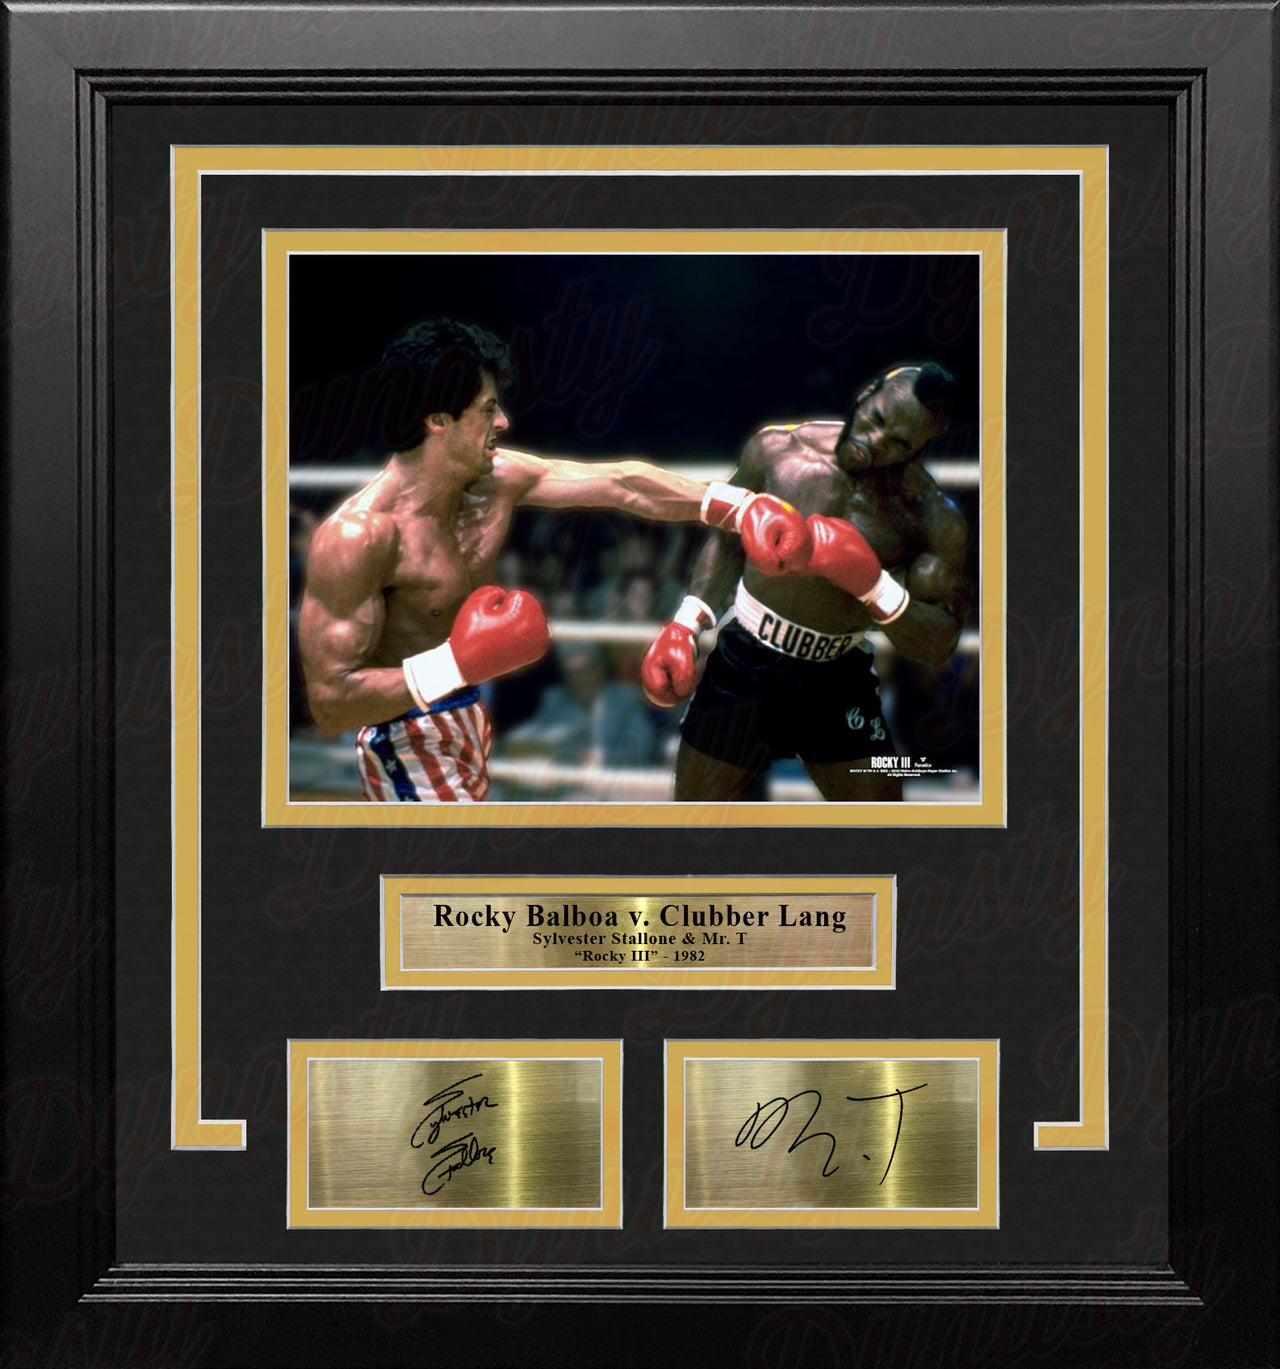 Rocky Balboa v. Clubber Lang 8" x 10" Framed Movie Photo with Engraved Autographs - Dynasty Sports & Framing 